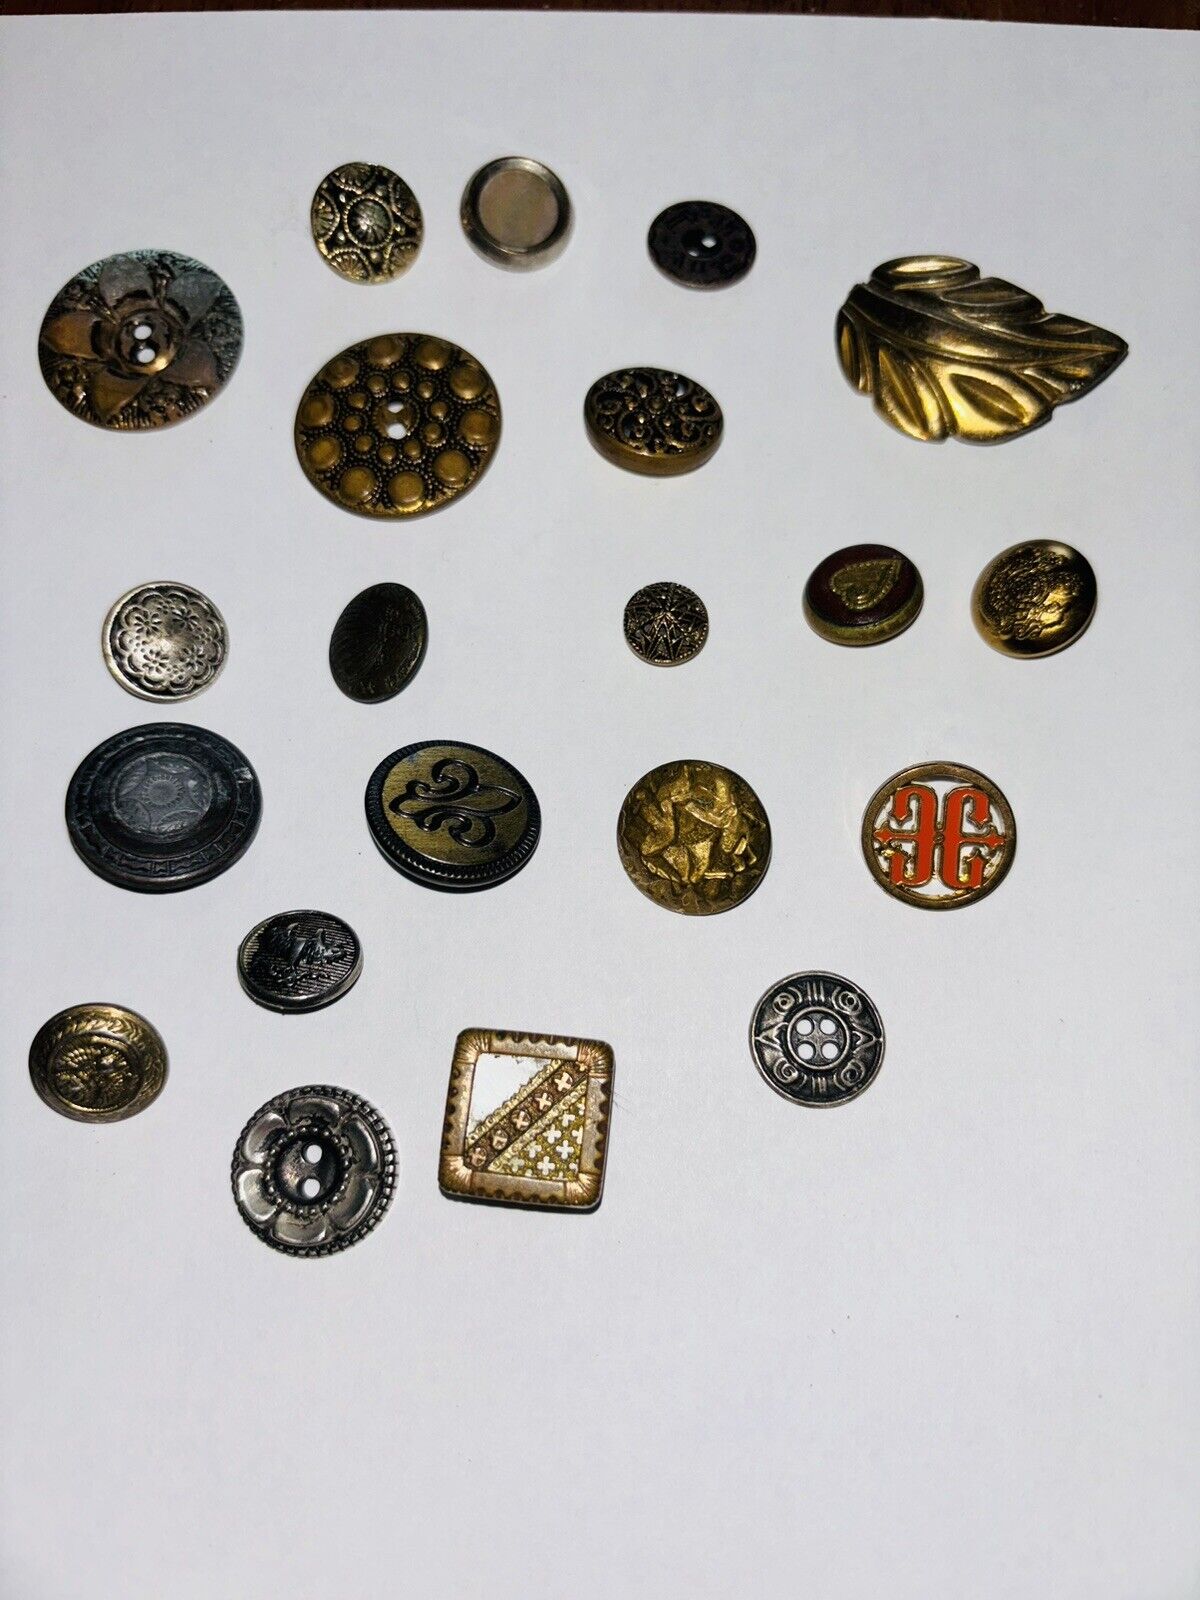 Assorted Vintage  Antique Metal OLD Buttons Lot Collection -21 Buttons